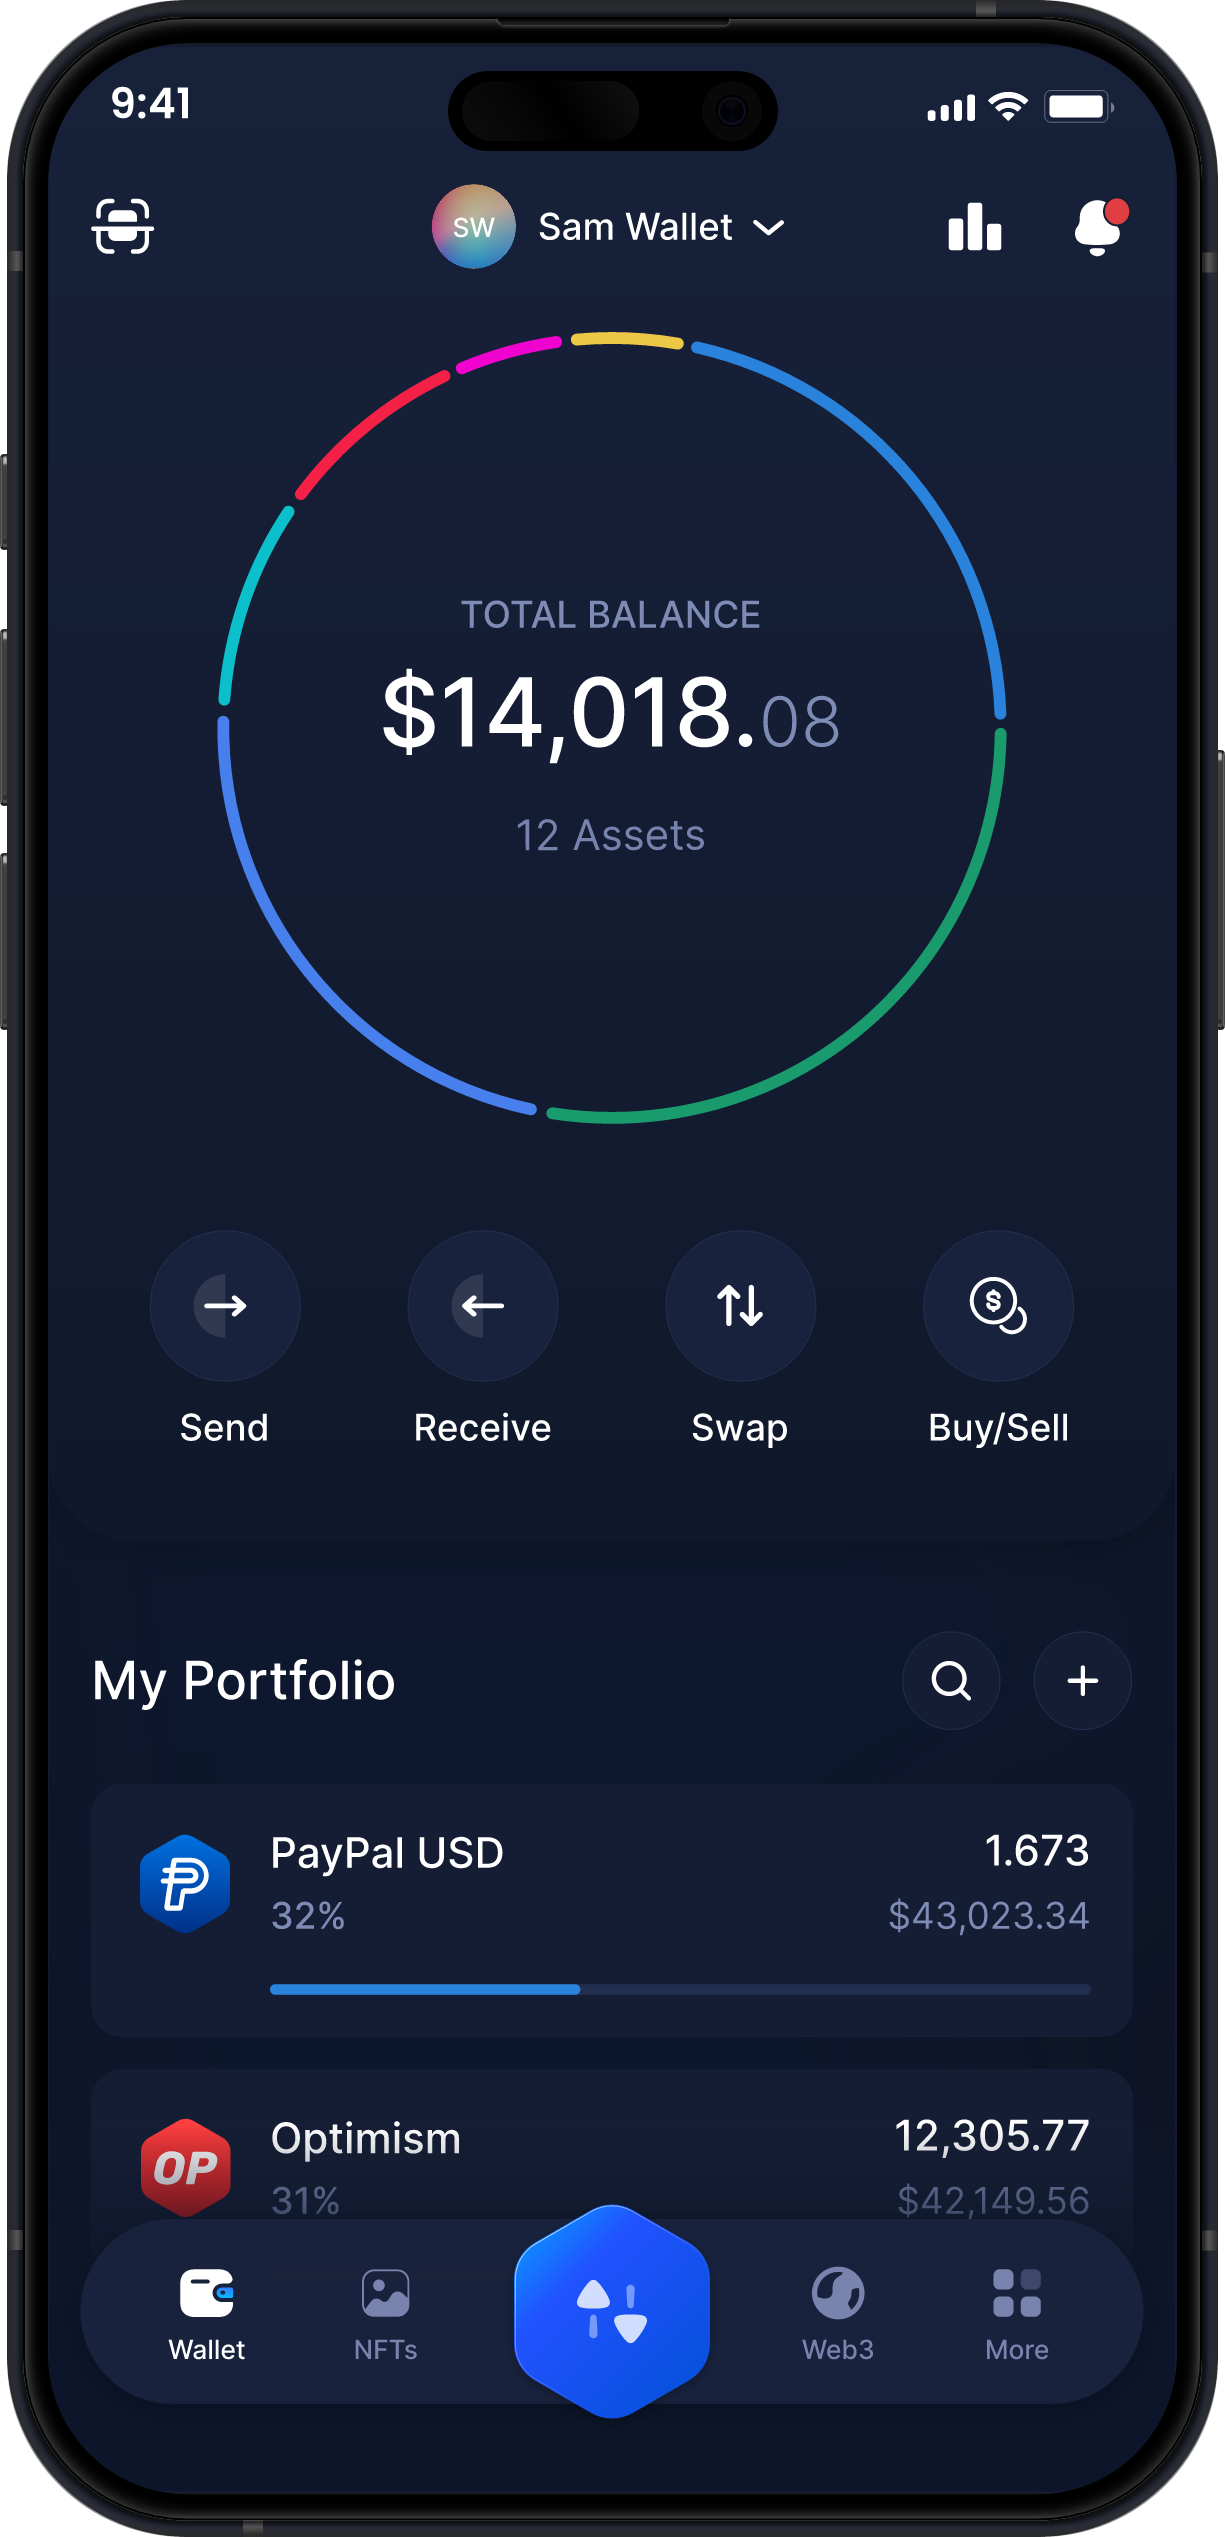 Infinity Mobile PayPal USD Wallet - Dashboard PYUSD